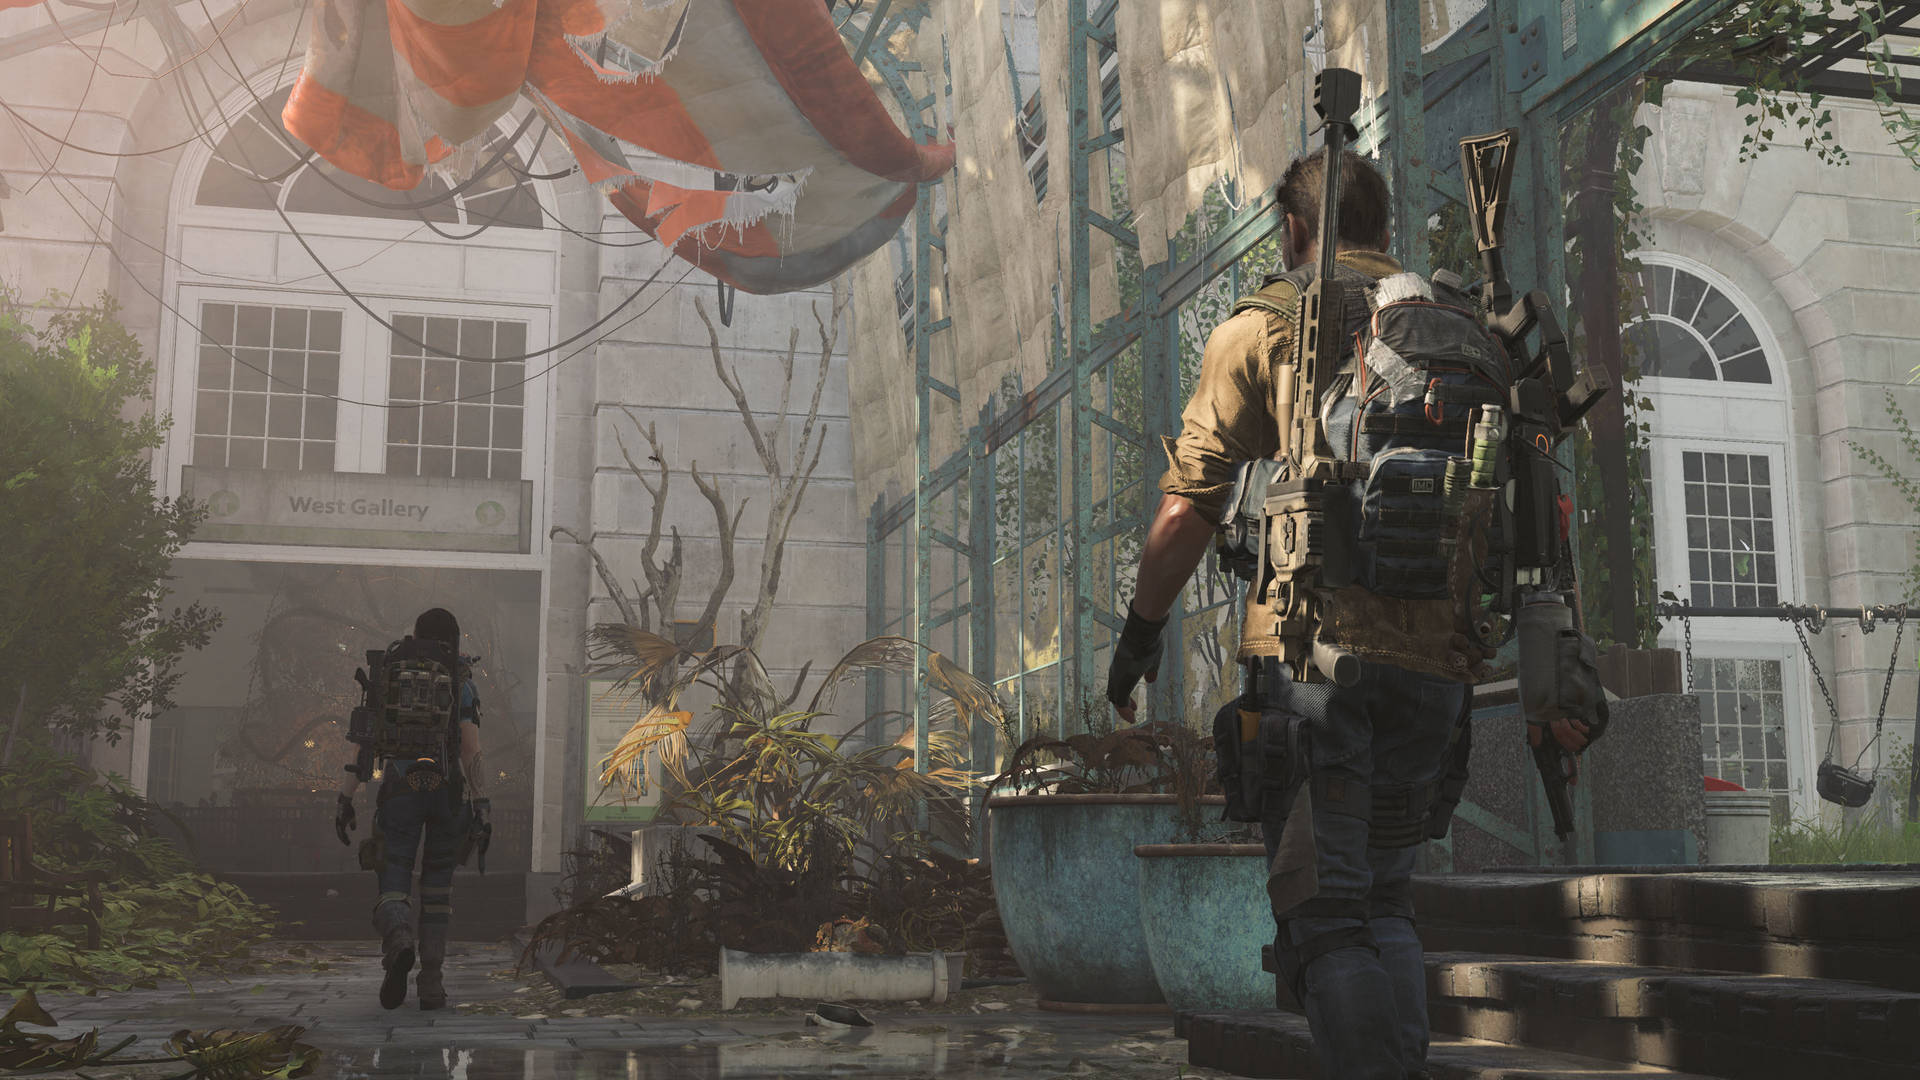 High-resolution Image Of The Division 4k: Confrontation At The Mansion Battlefield